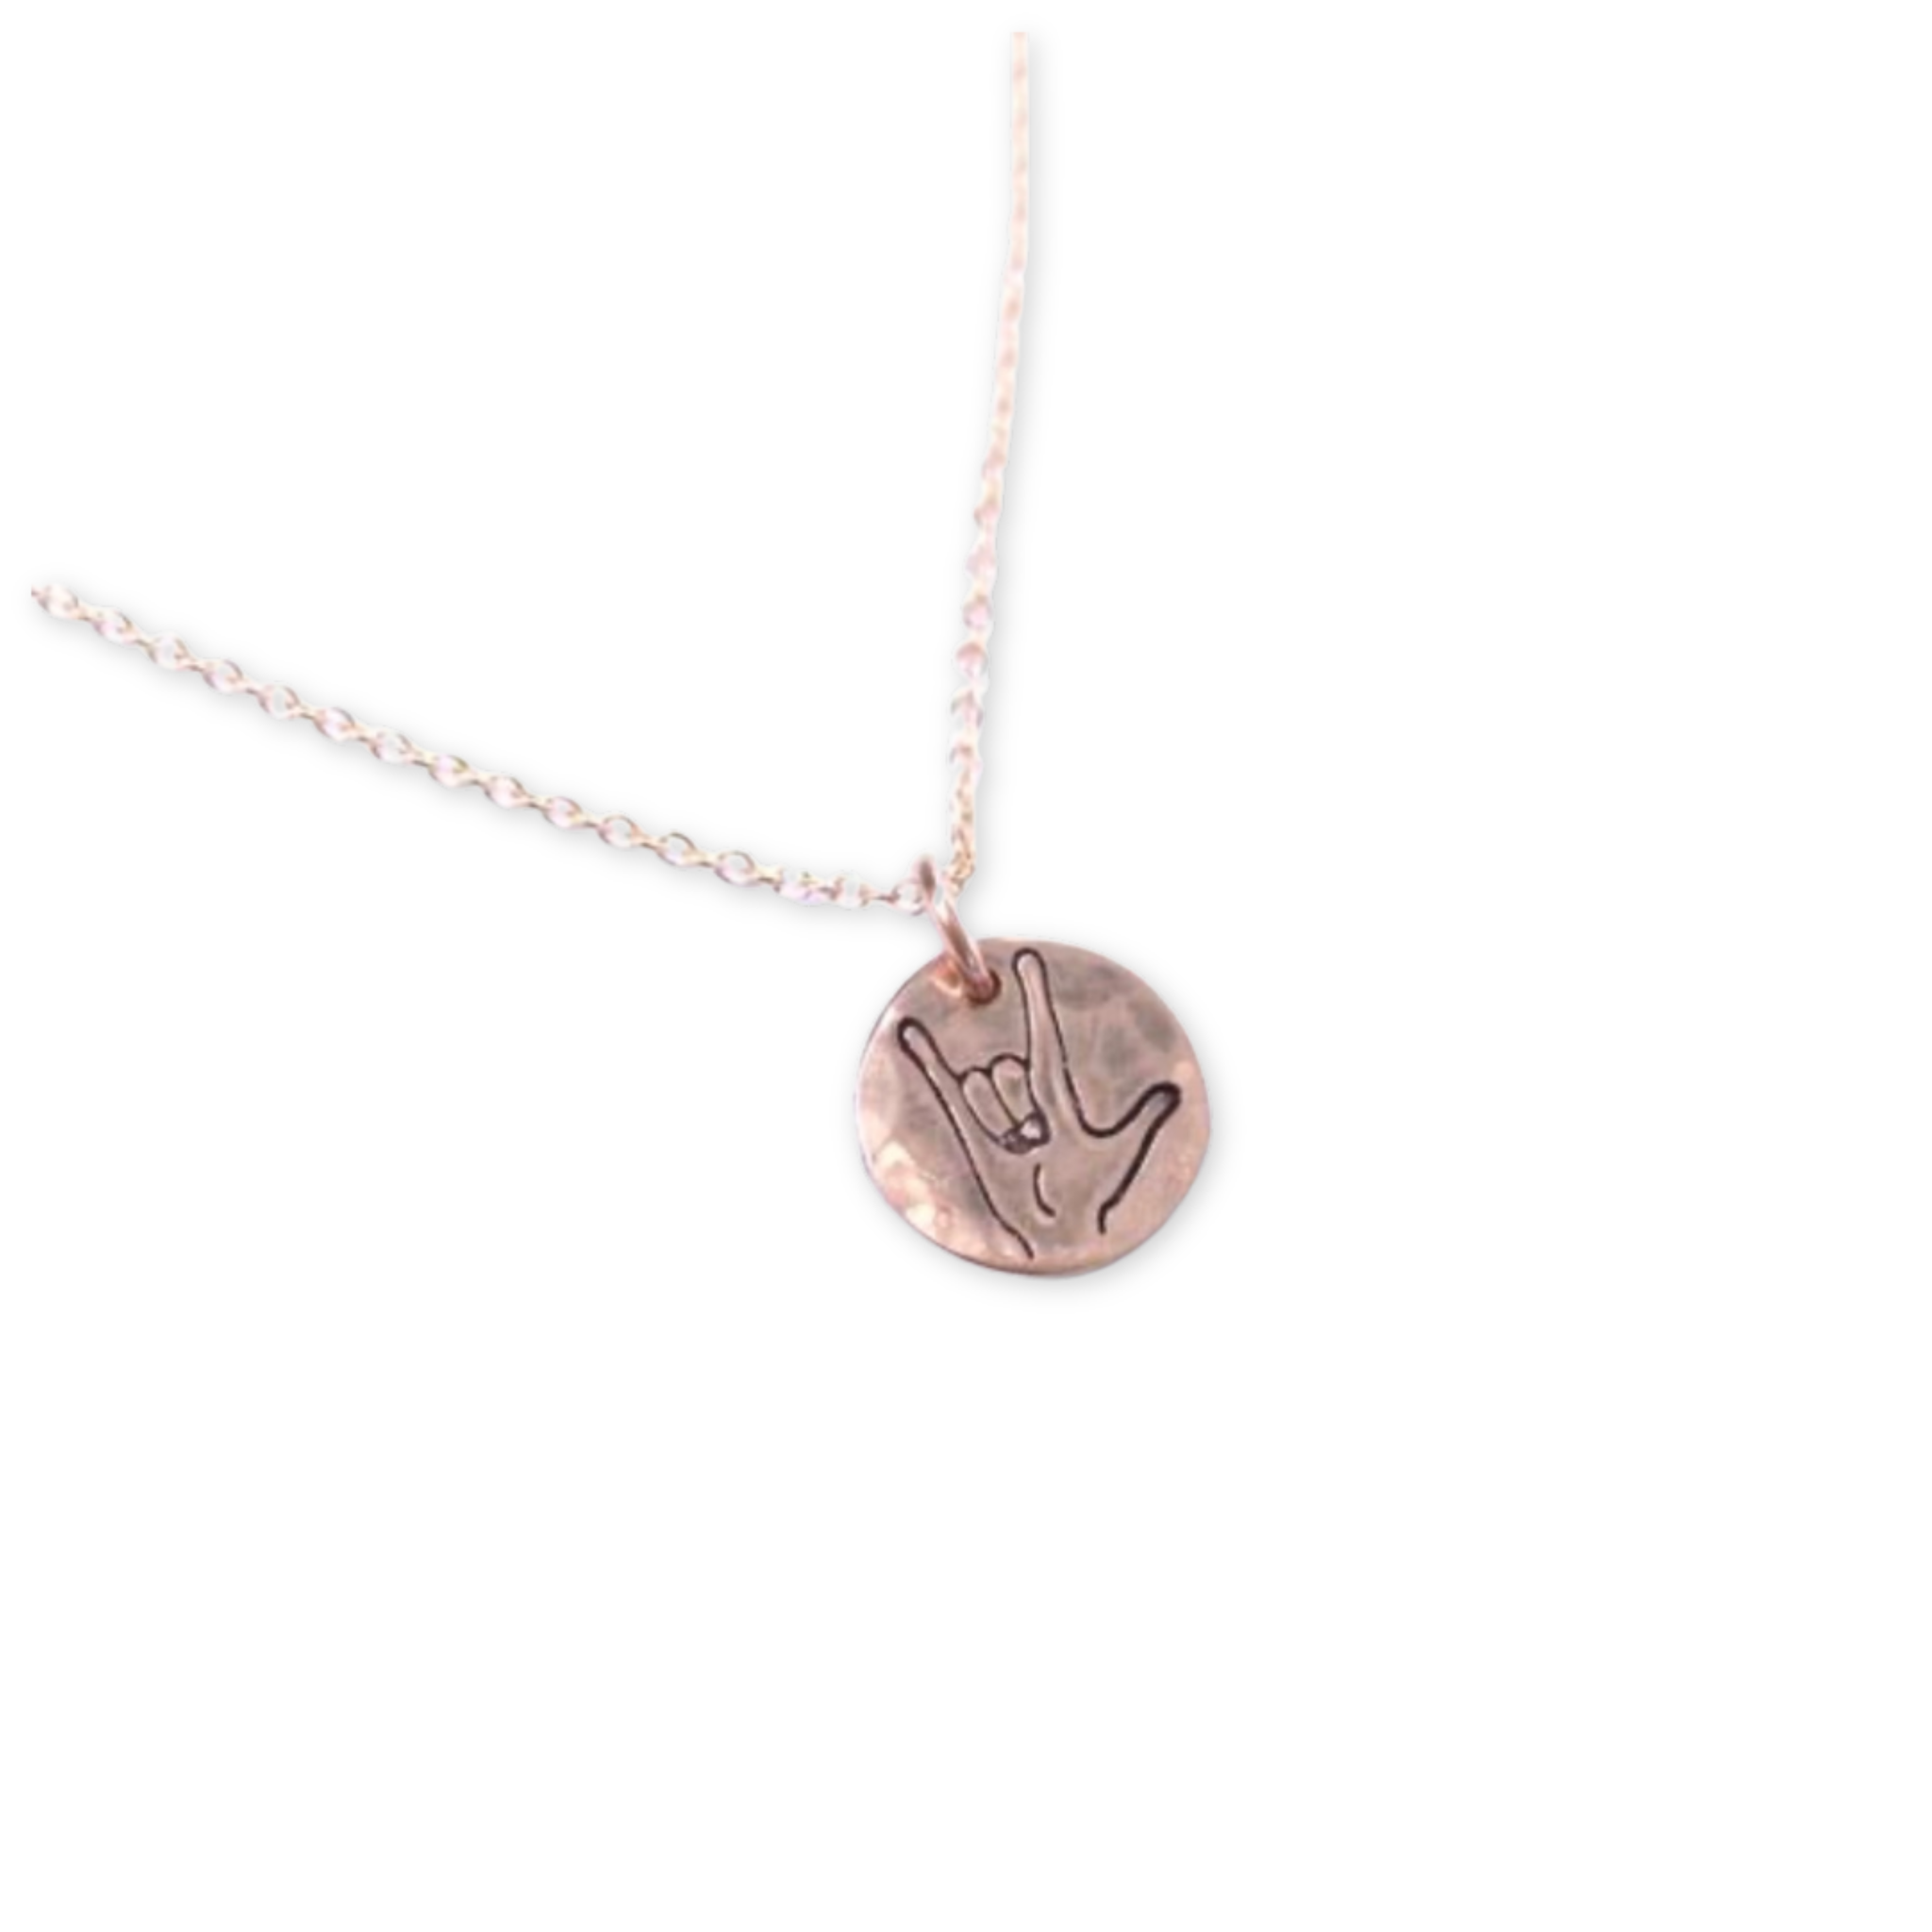 necklace with a hammered round disc and a stamped sign language symbol meaning i love you